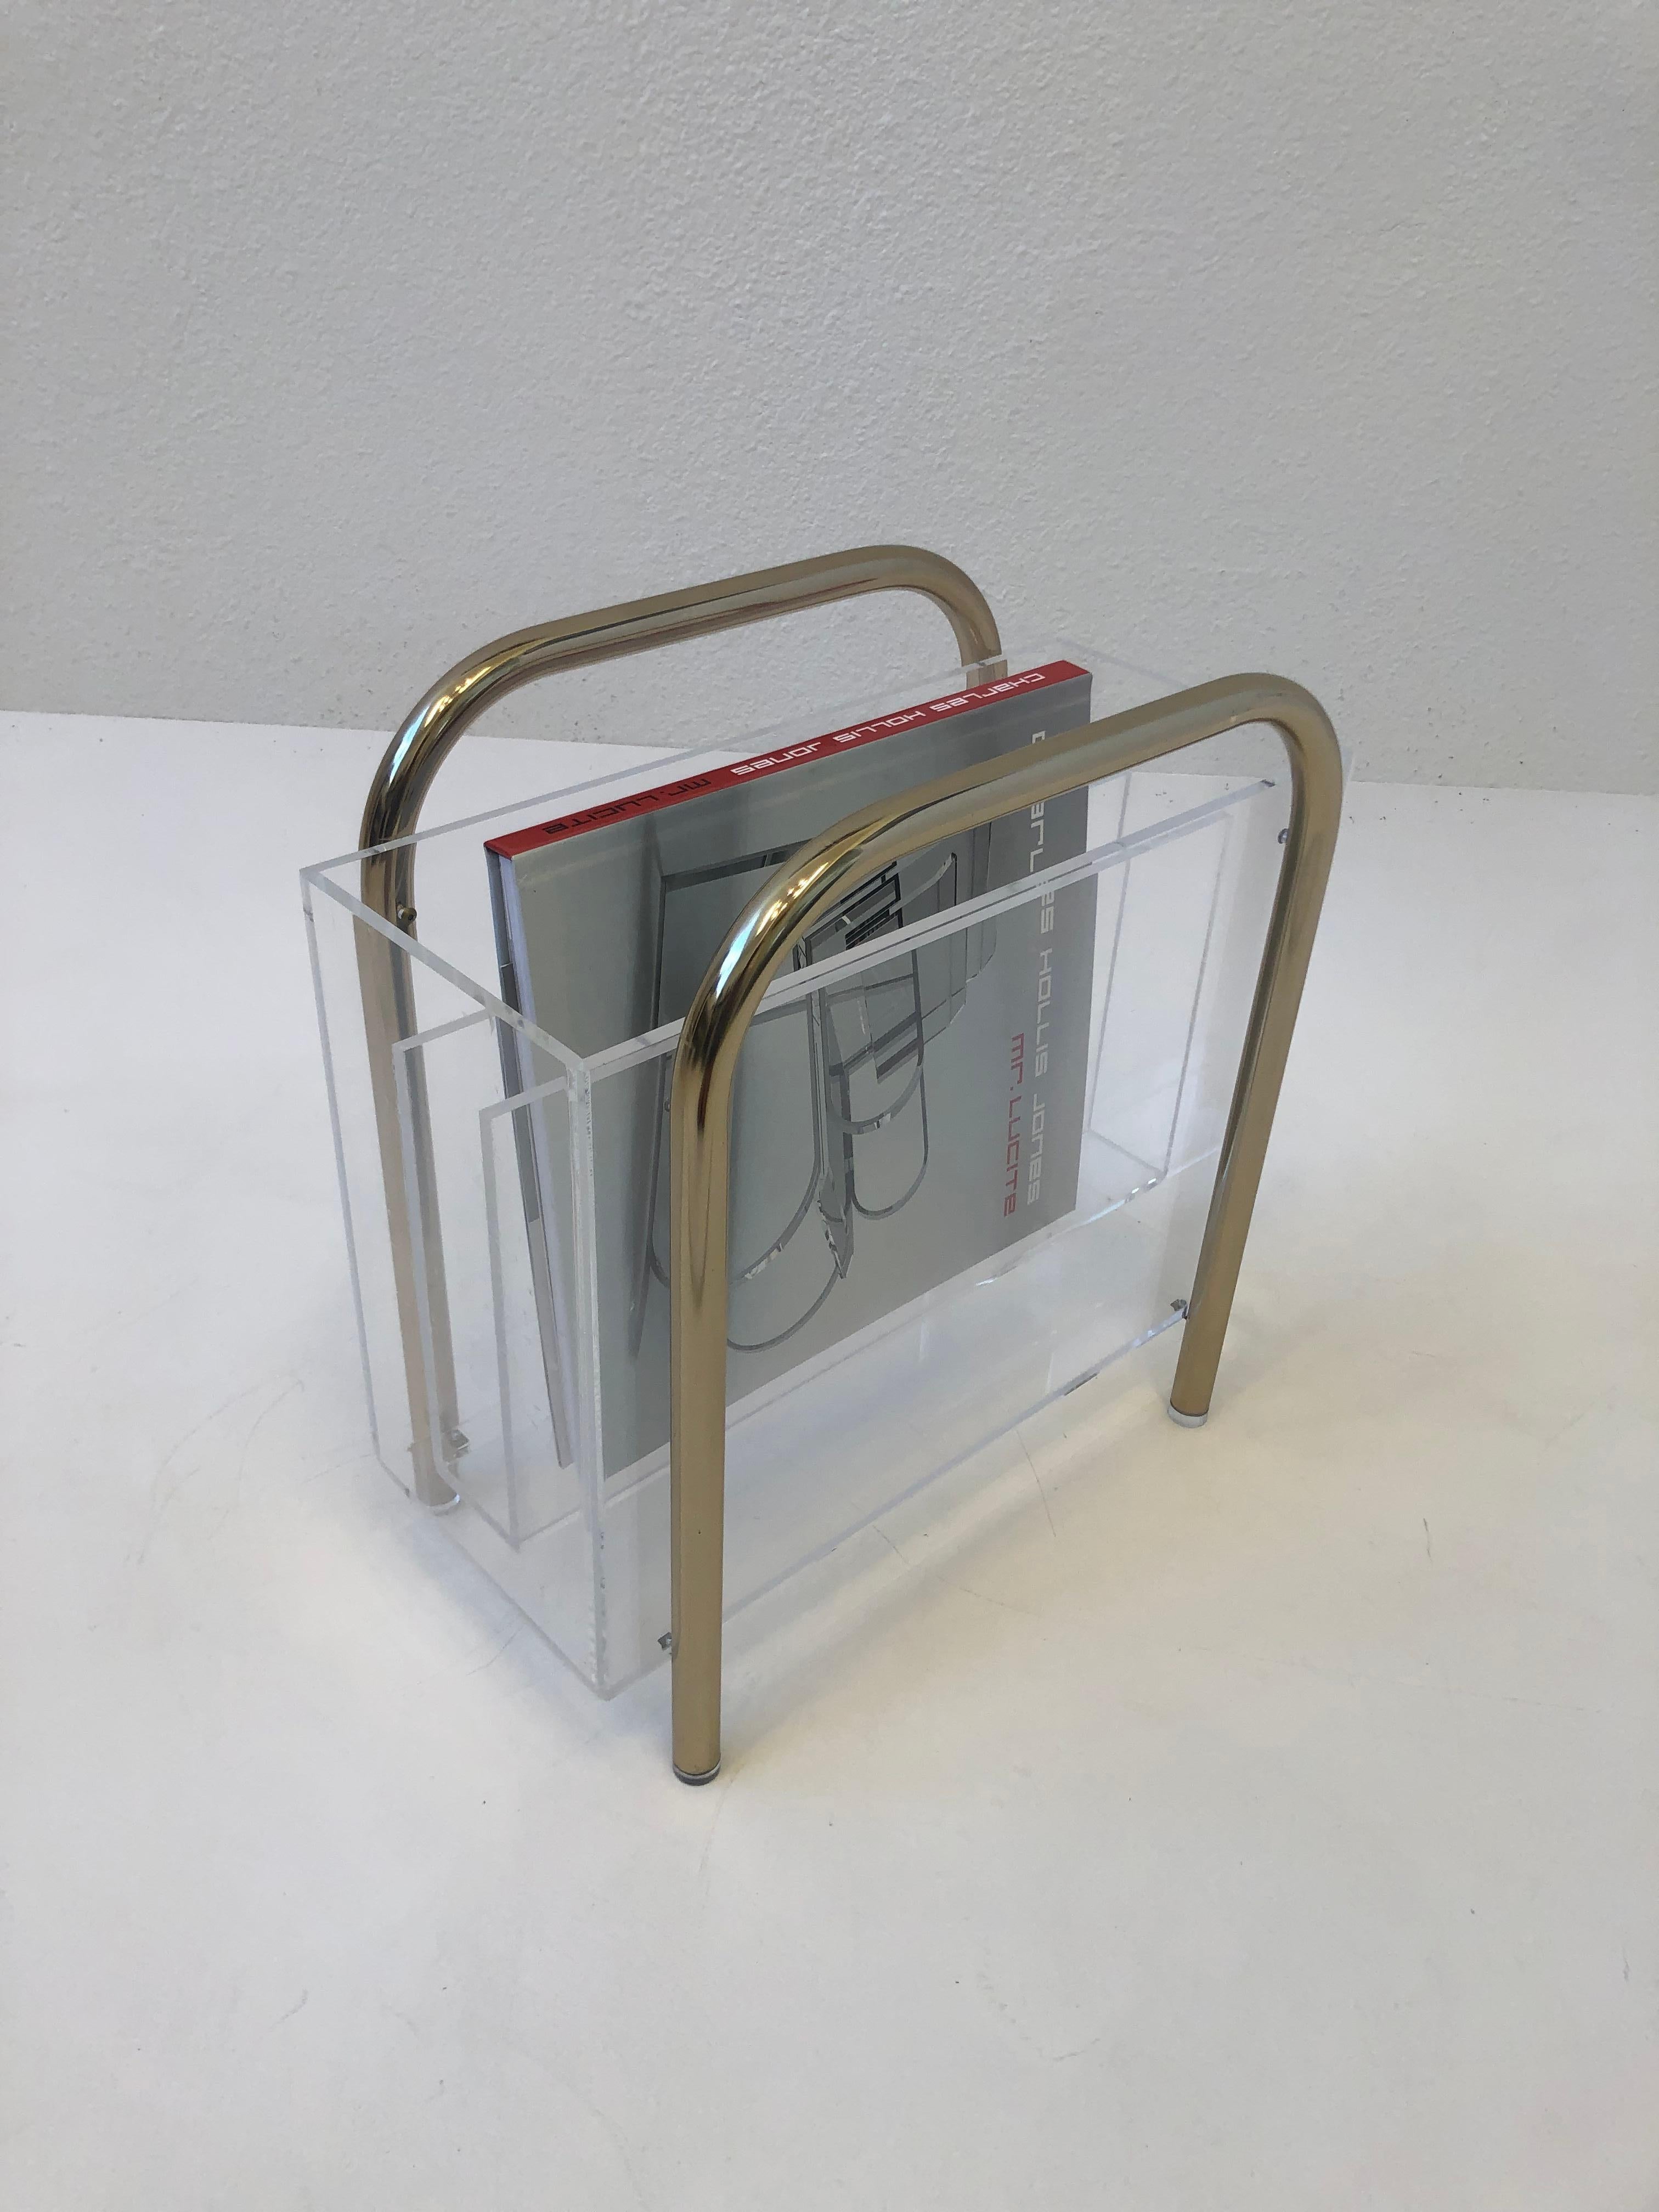 1970’s Magazine holder by renowned American designer Charles Hollis Jone. 
Constructed of clear lucite and polish brass. We also have a chrome one in a different listing. 
It’s in original condition, it shows minor wear consistent with age and